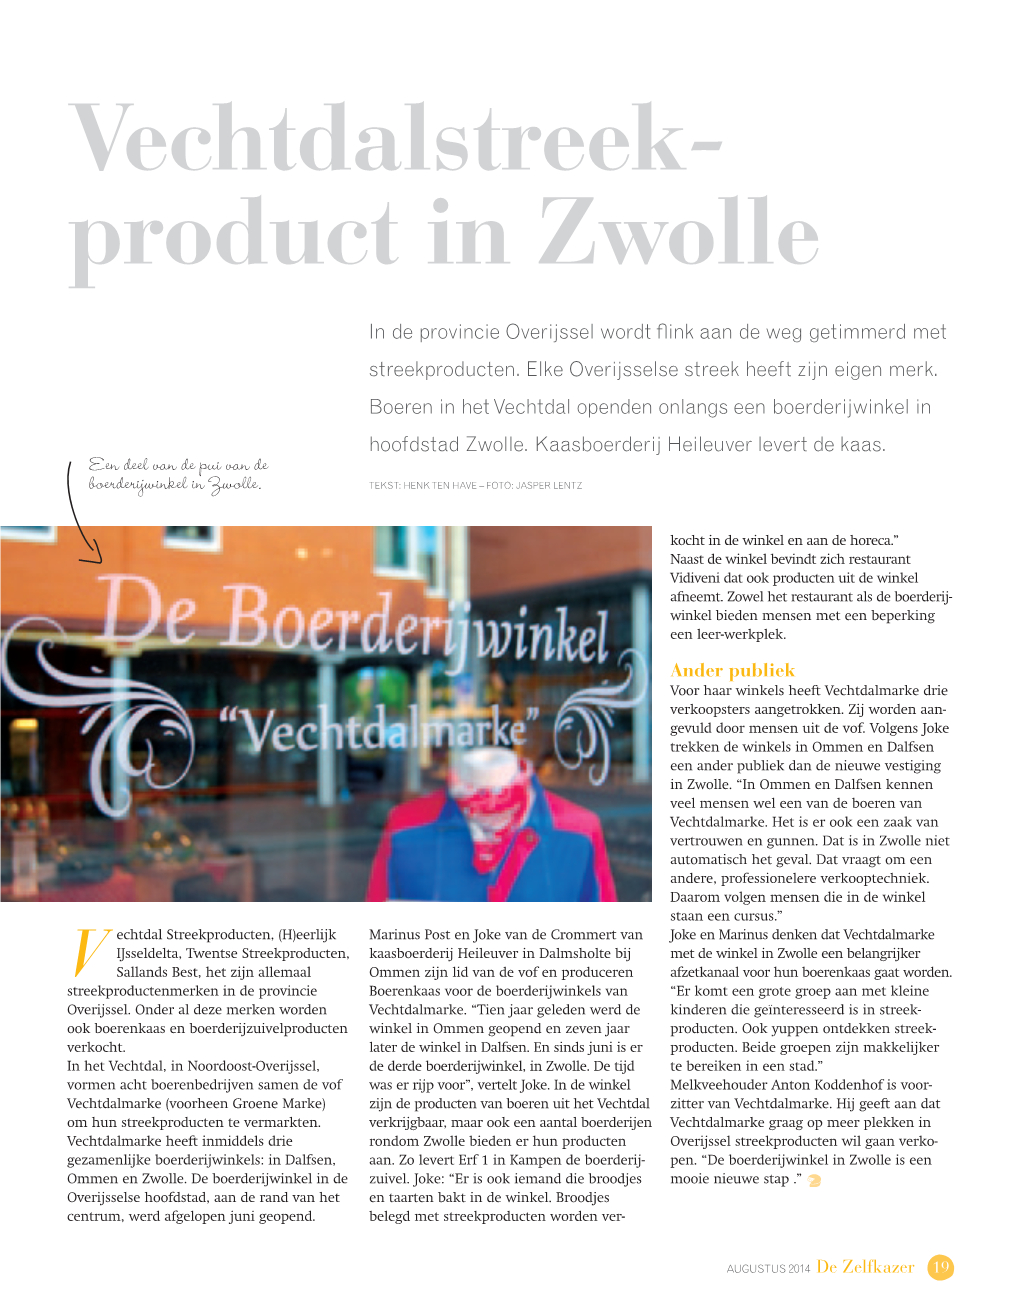 Vechtdalstreek- Product in Zwolle